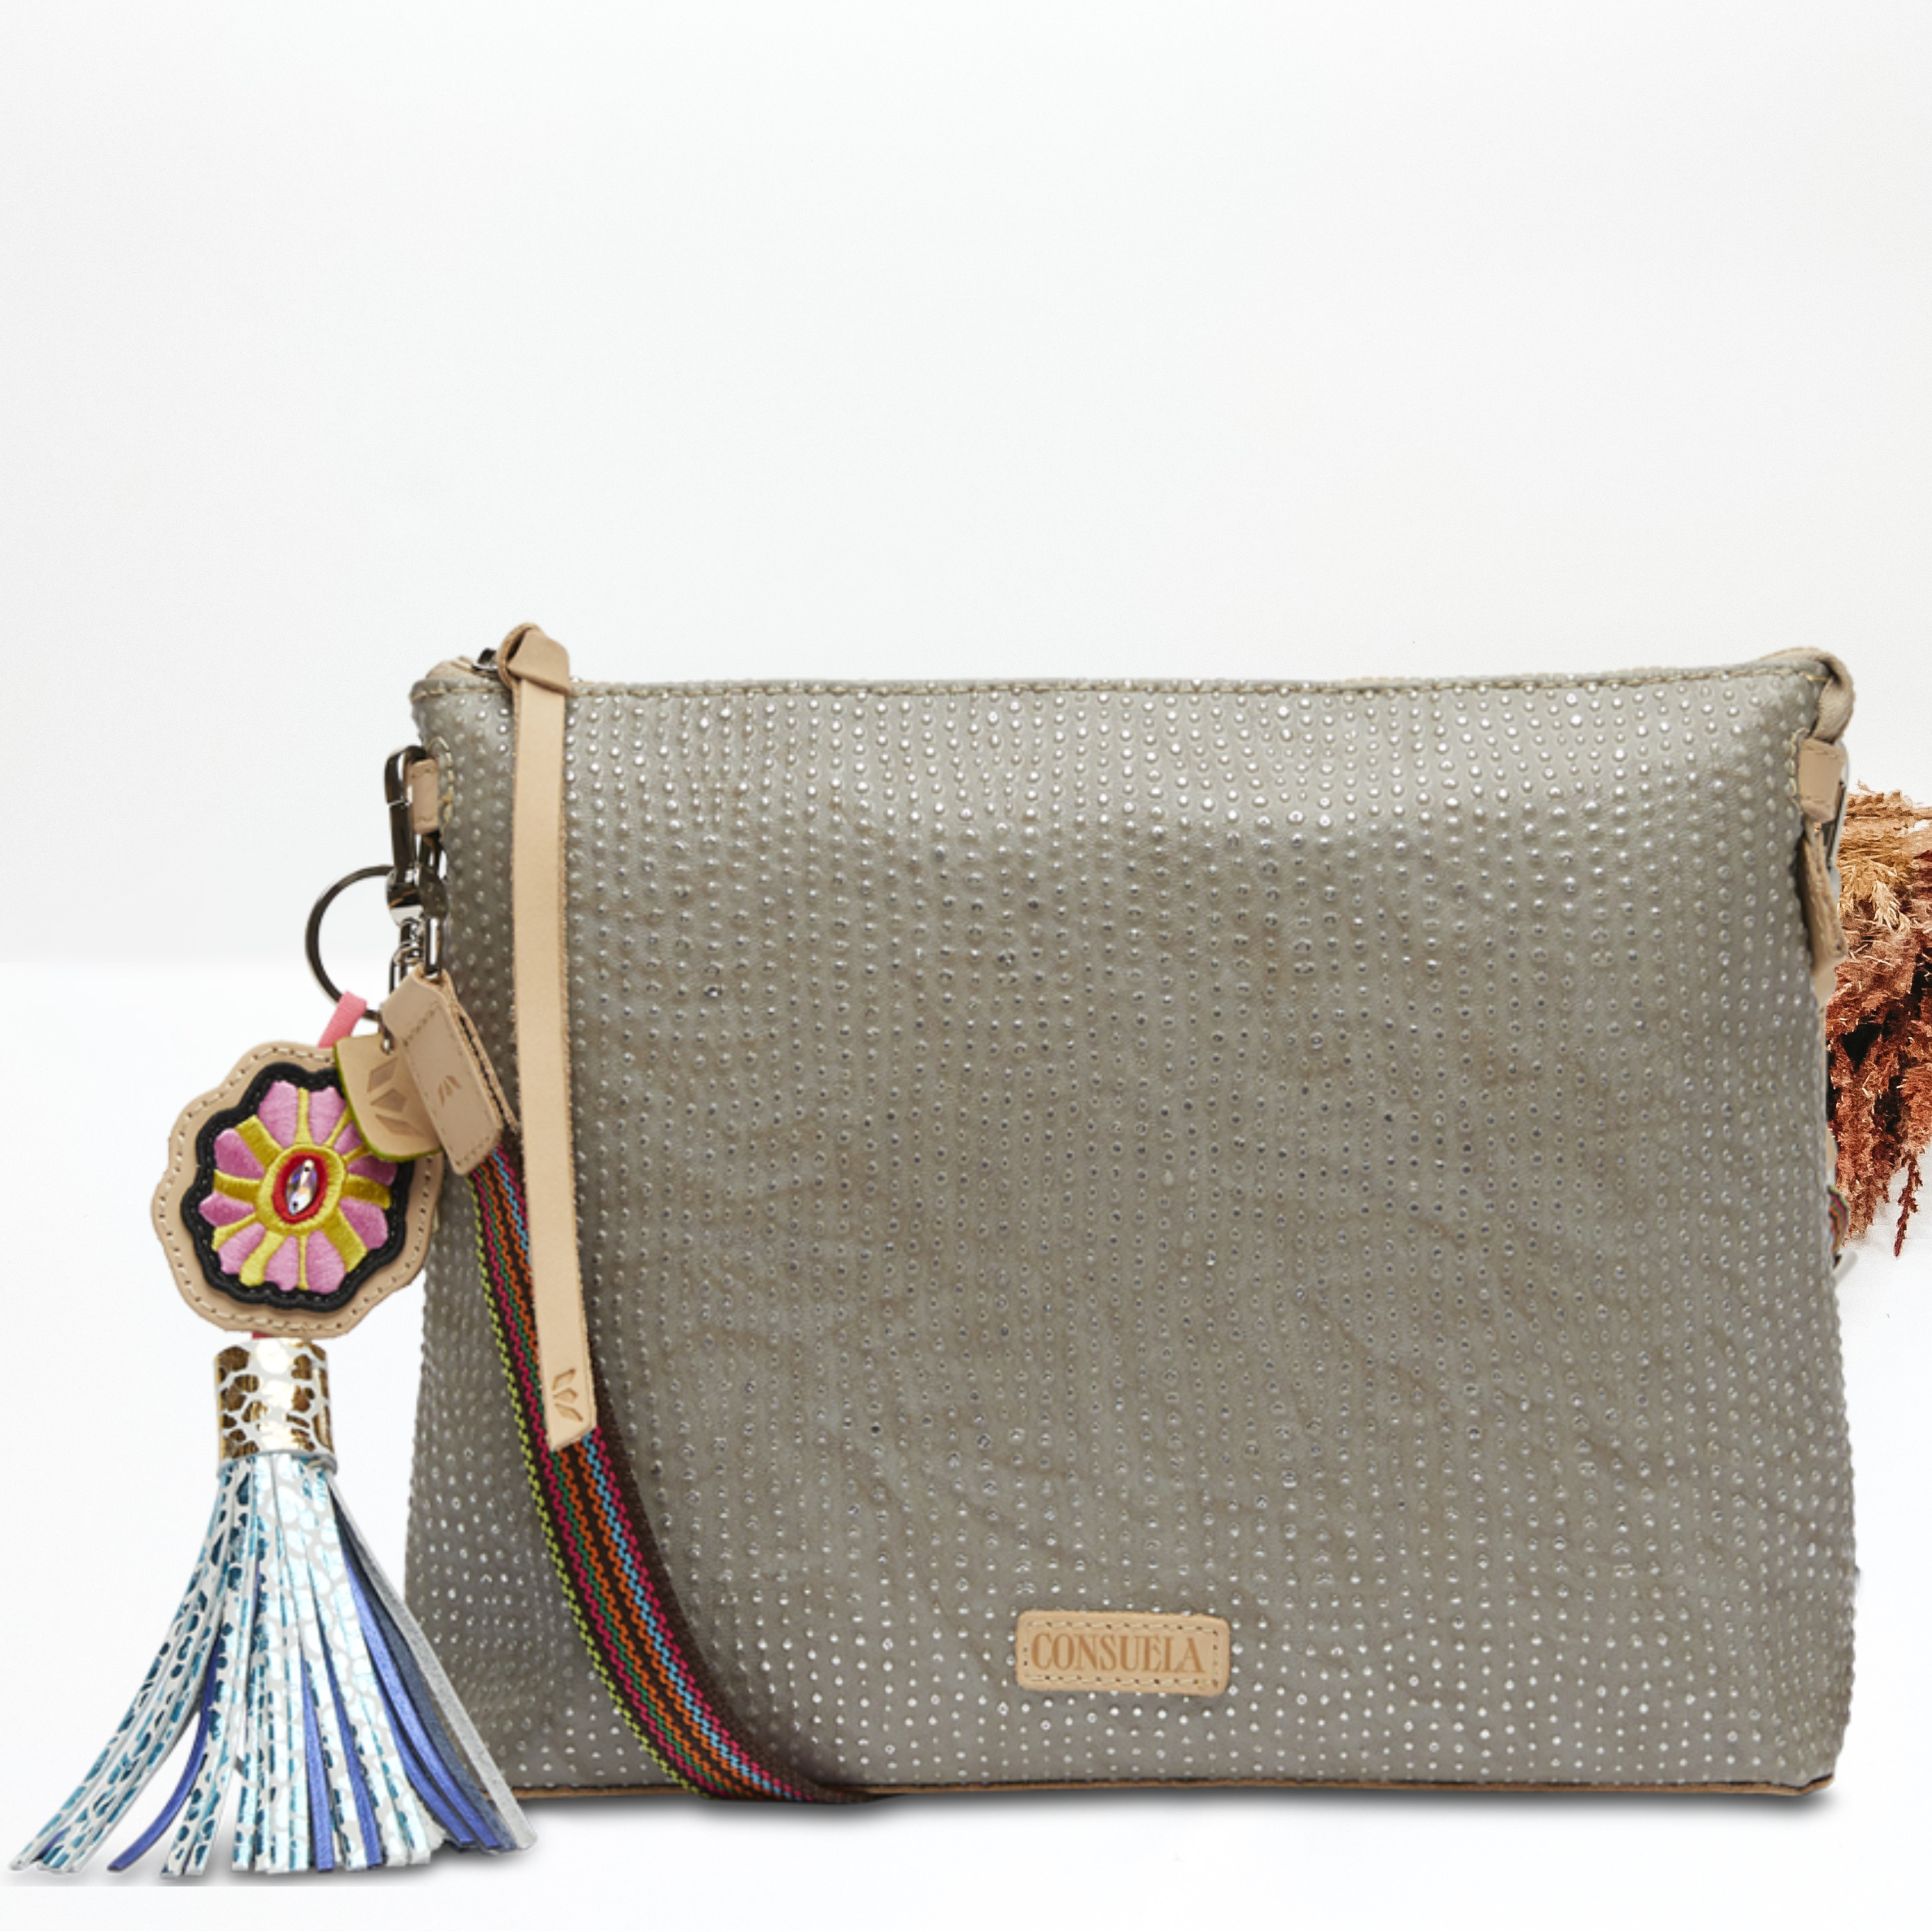 Pictured on a white background is a grey downtown crossbody purse with a silver dotted print. This purse has a woven crossbody strap, a multicolored tassel charm and light tan leather zipper pull.